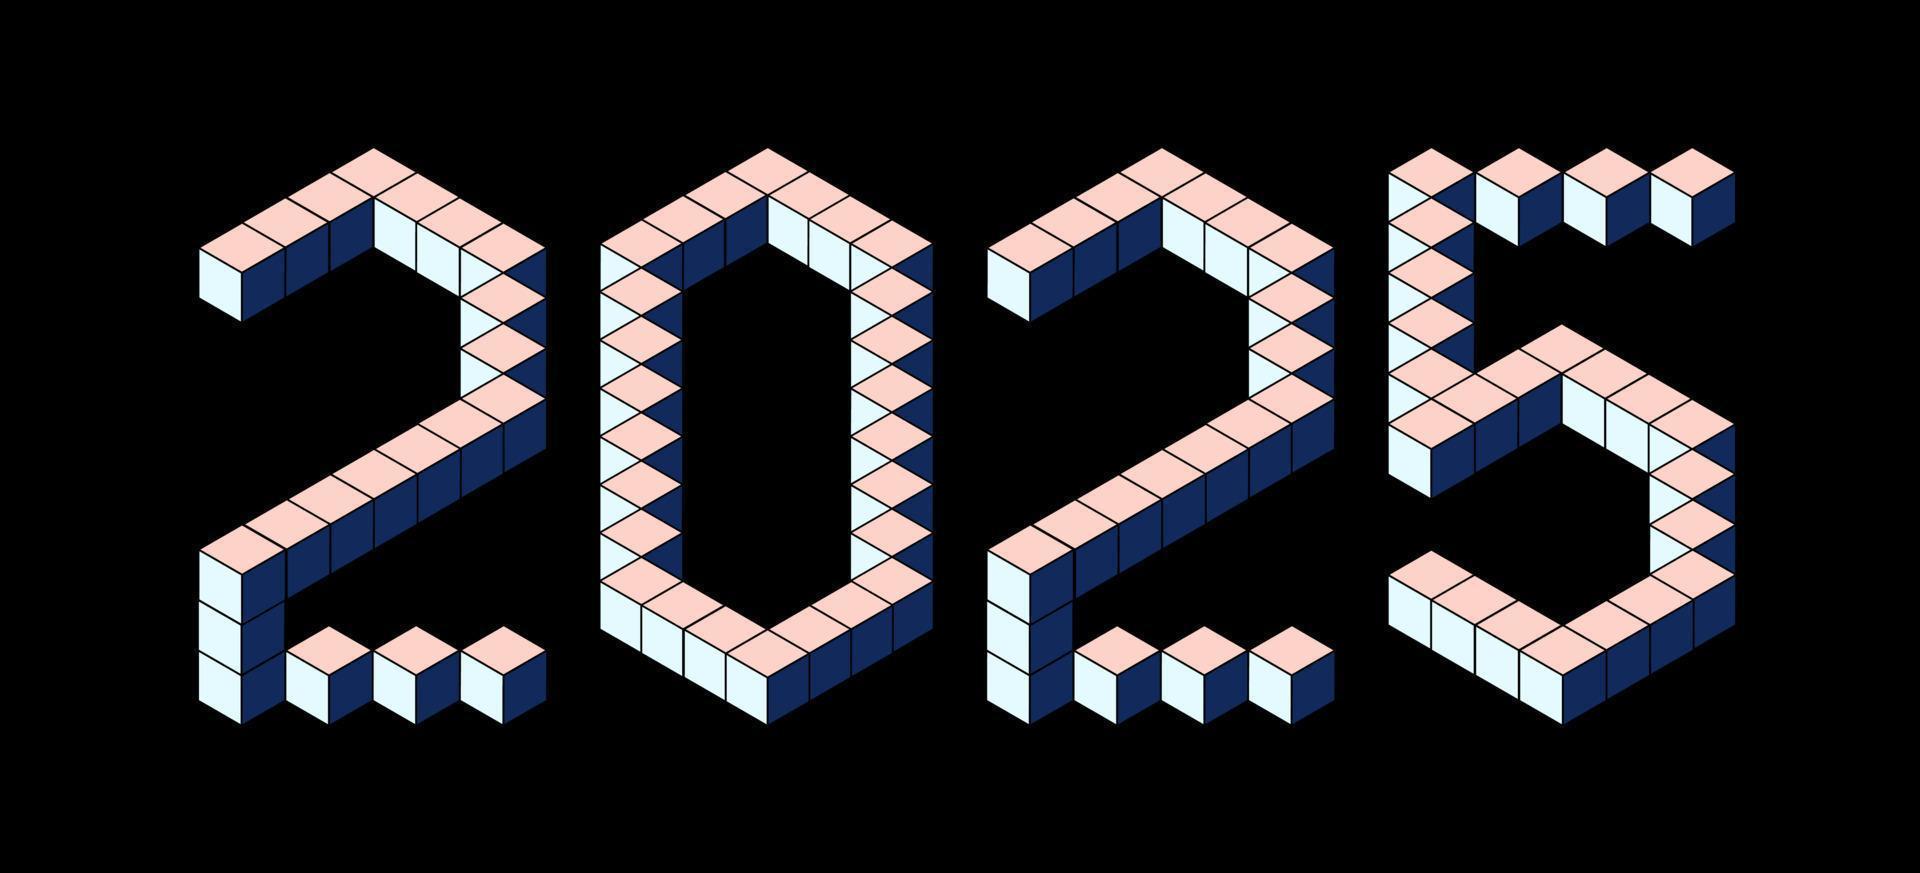 New Year 2025 design from pastel cubes on black. 8 bit style. vector